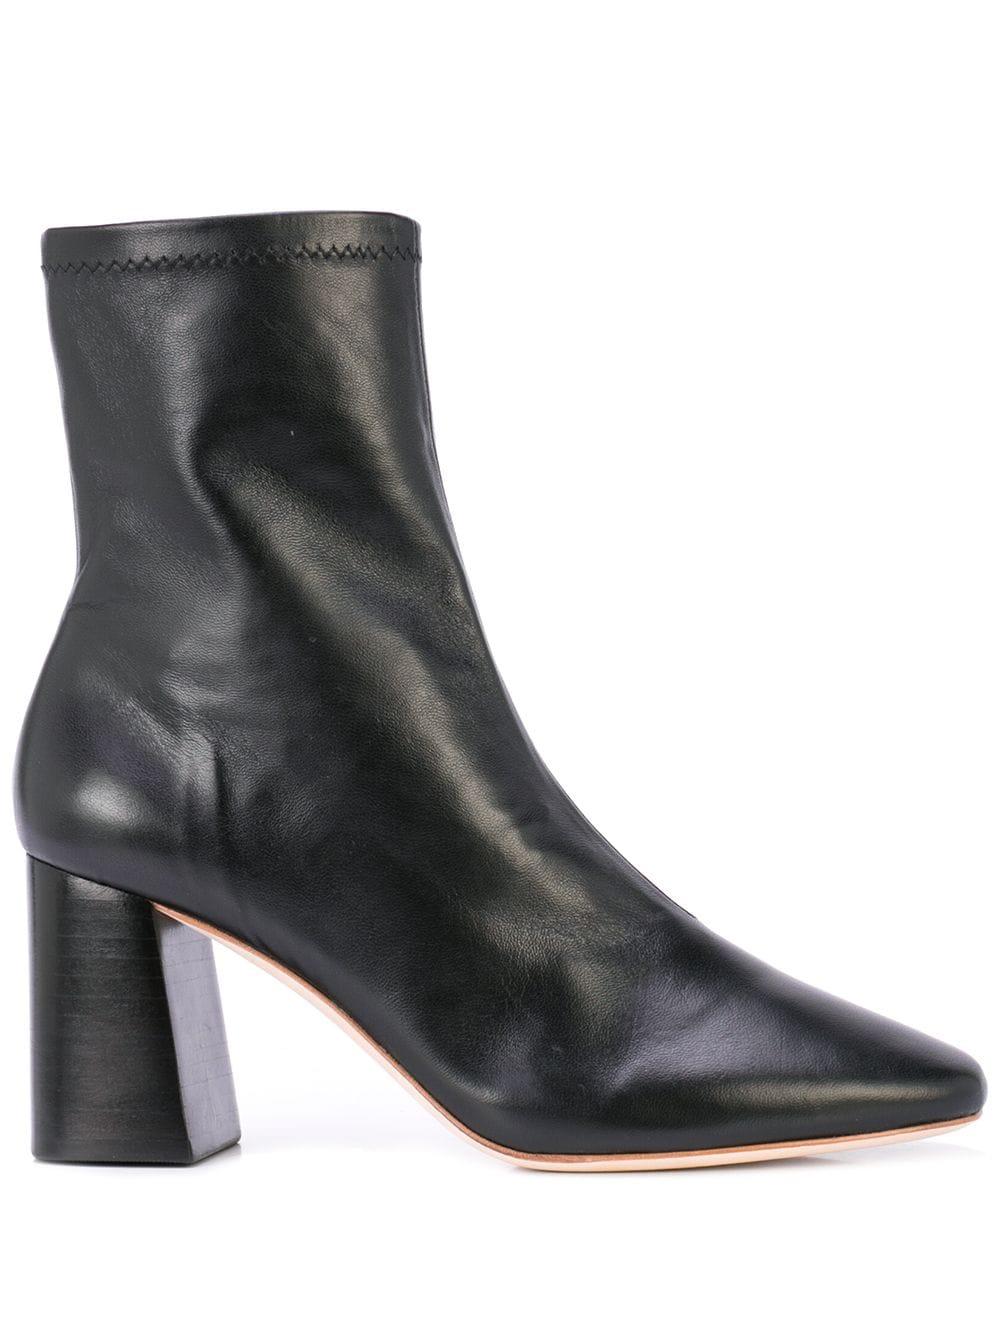 Loeffler Randall Leather Elise Ankle Boots in Black - Lyst